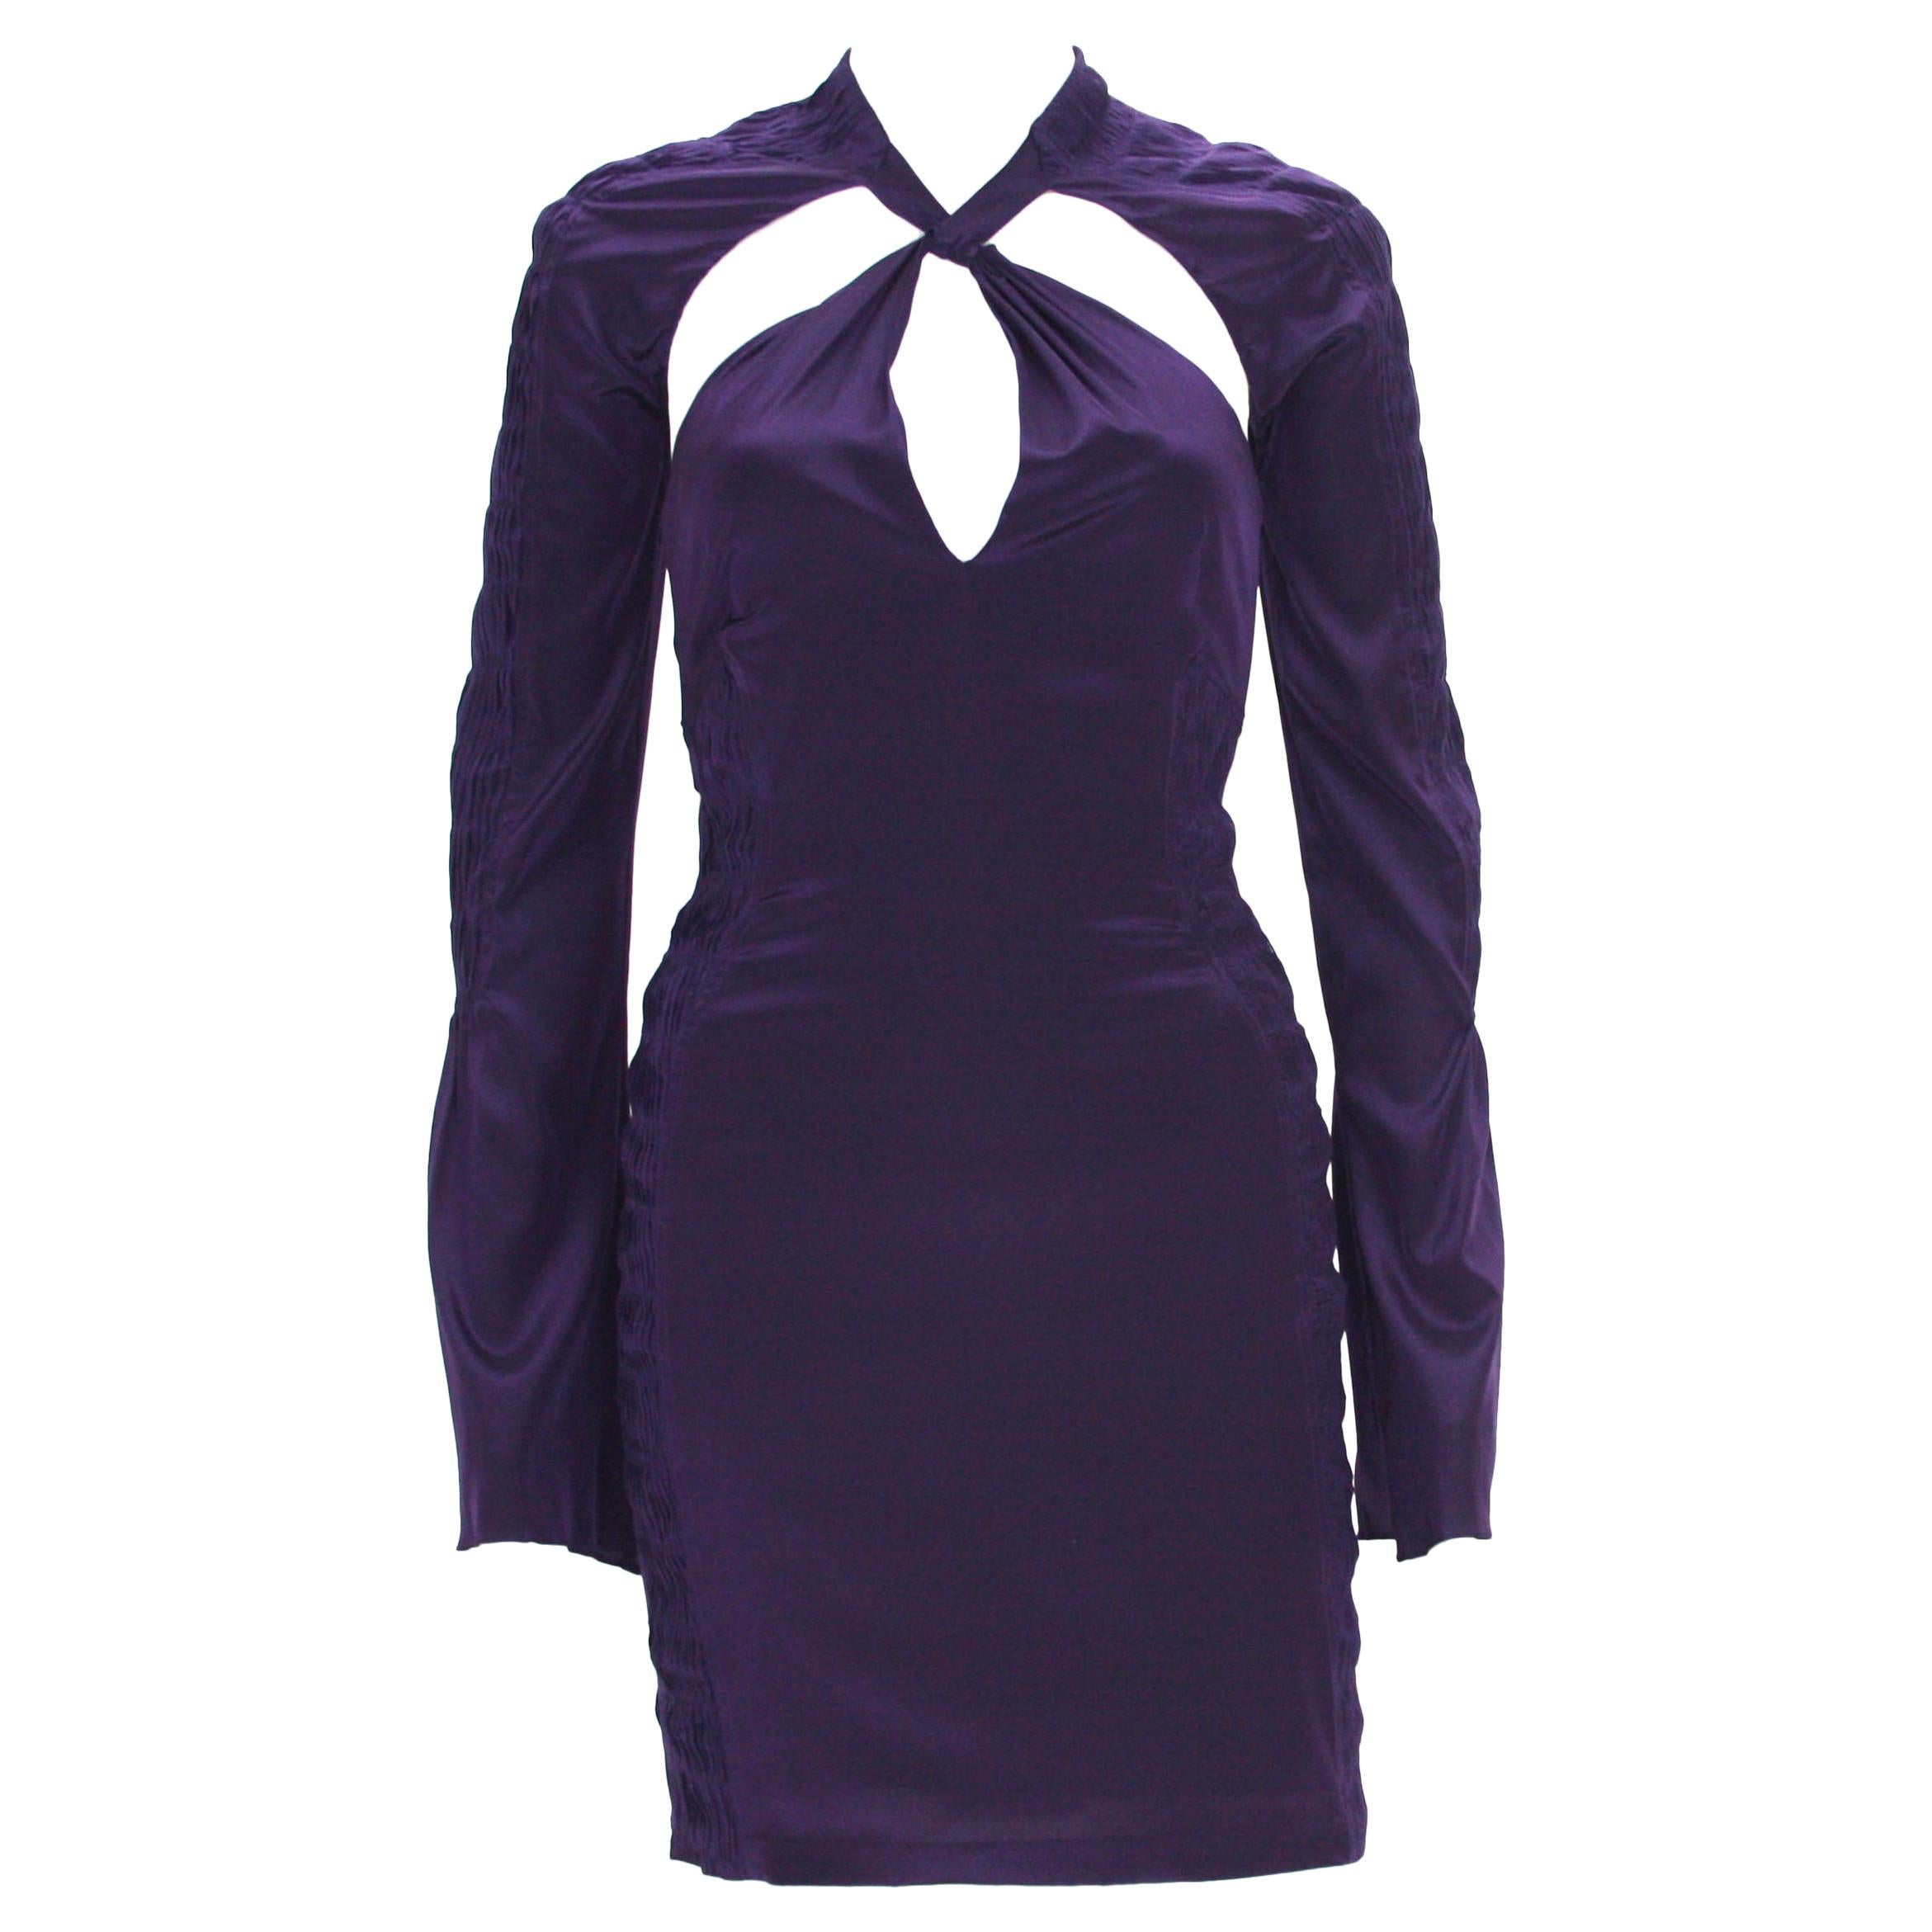 New Tom Ford for Gucci Plunging Backless Mini Sexy Dress
S/S 2004 Collection
Designer size - 38
90% Silk, 10% Spandex; Deep Purple Color, Cut-Out Detail, Bell Sleeve, Fully Lined, Open Back, Gathered Panels,  Zip Closure.
Made in Italy.
New with tag.